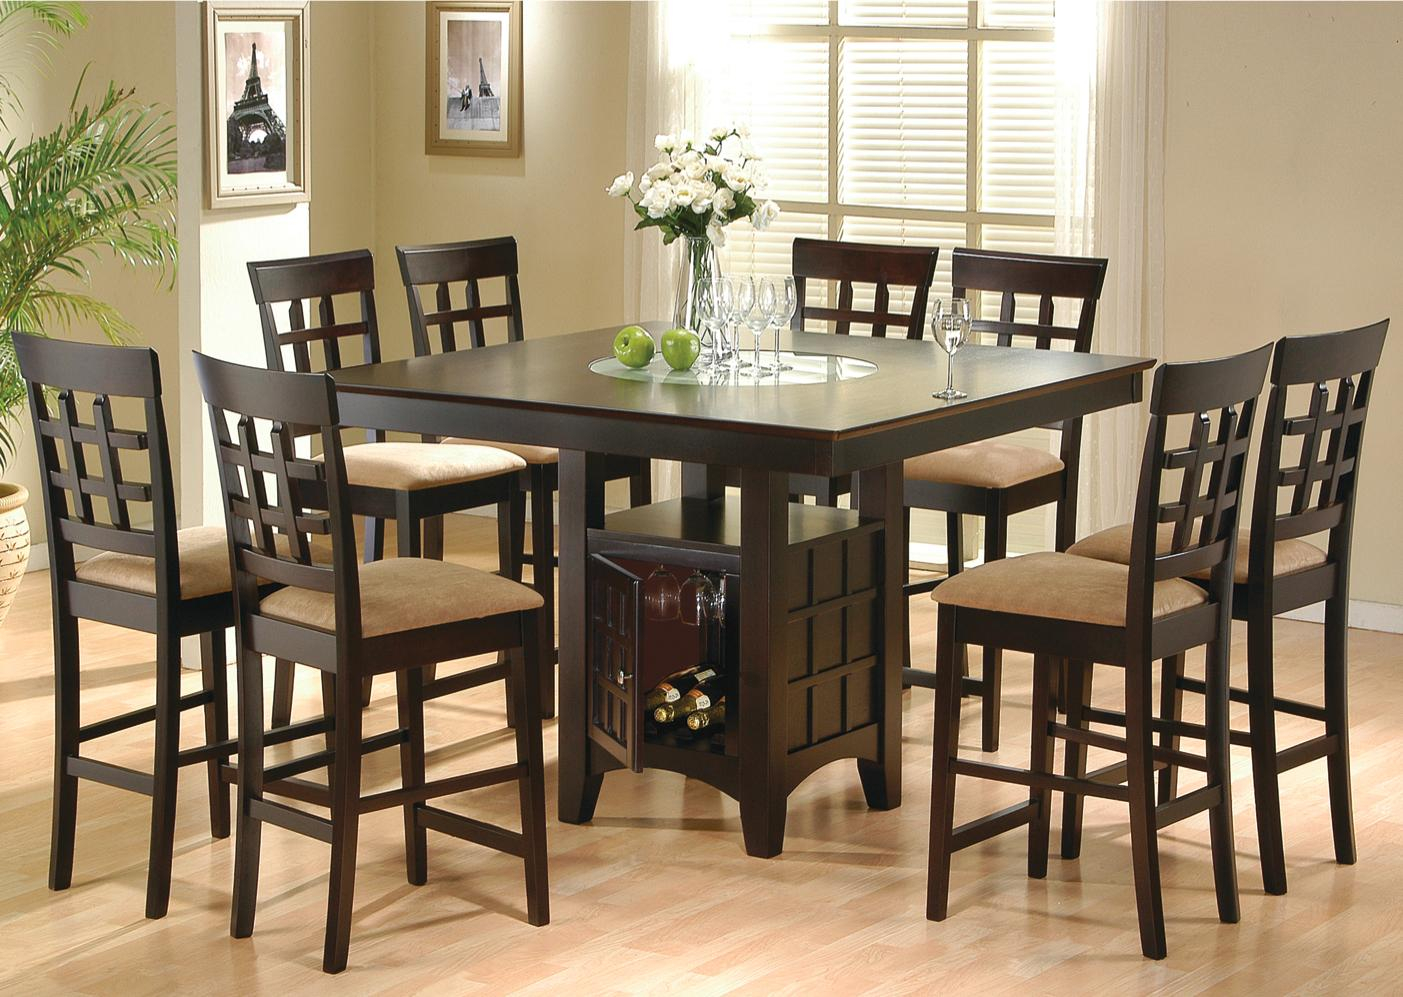 Mix And Match Dining Room Set